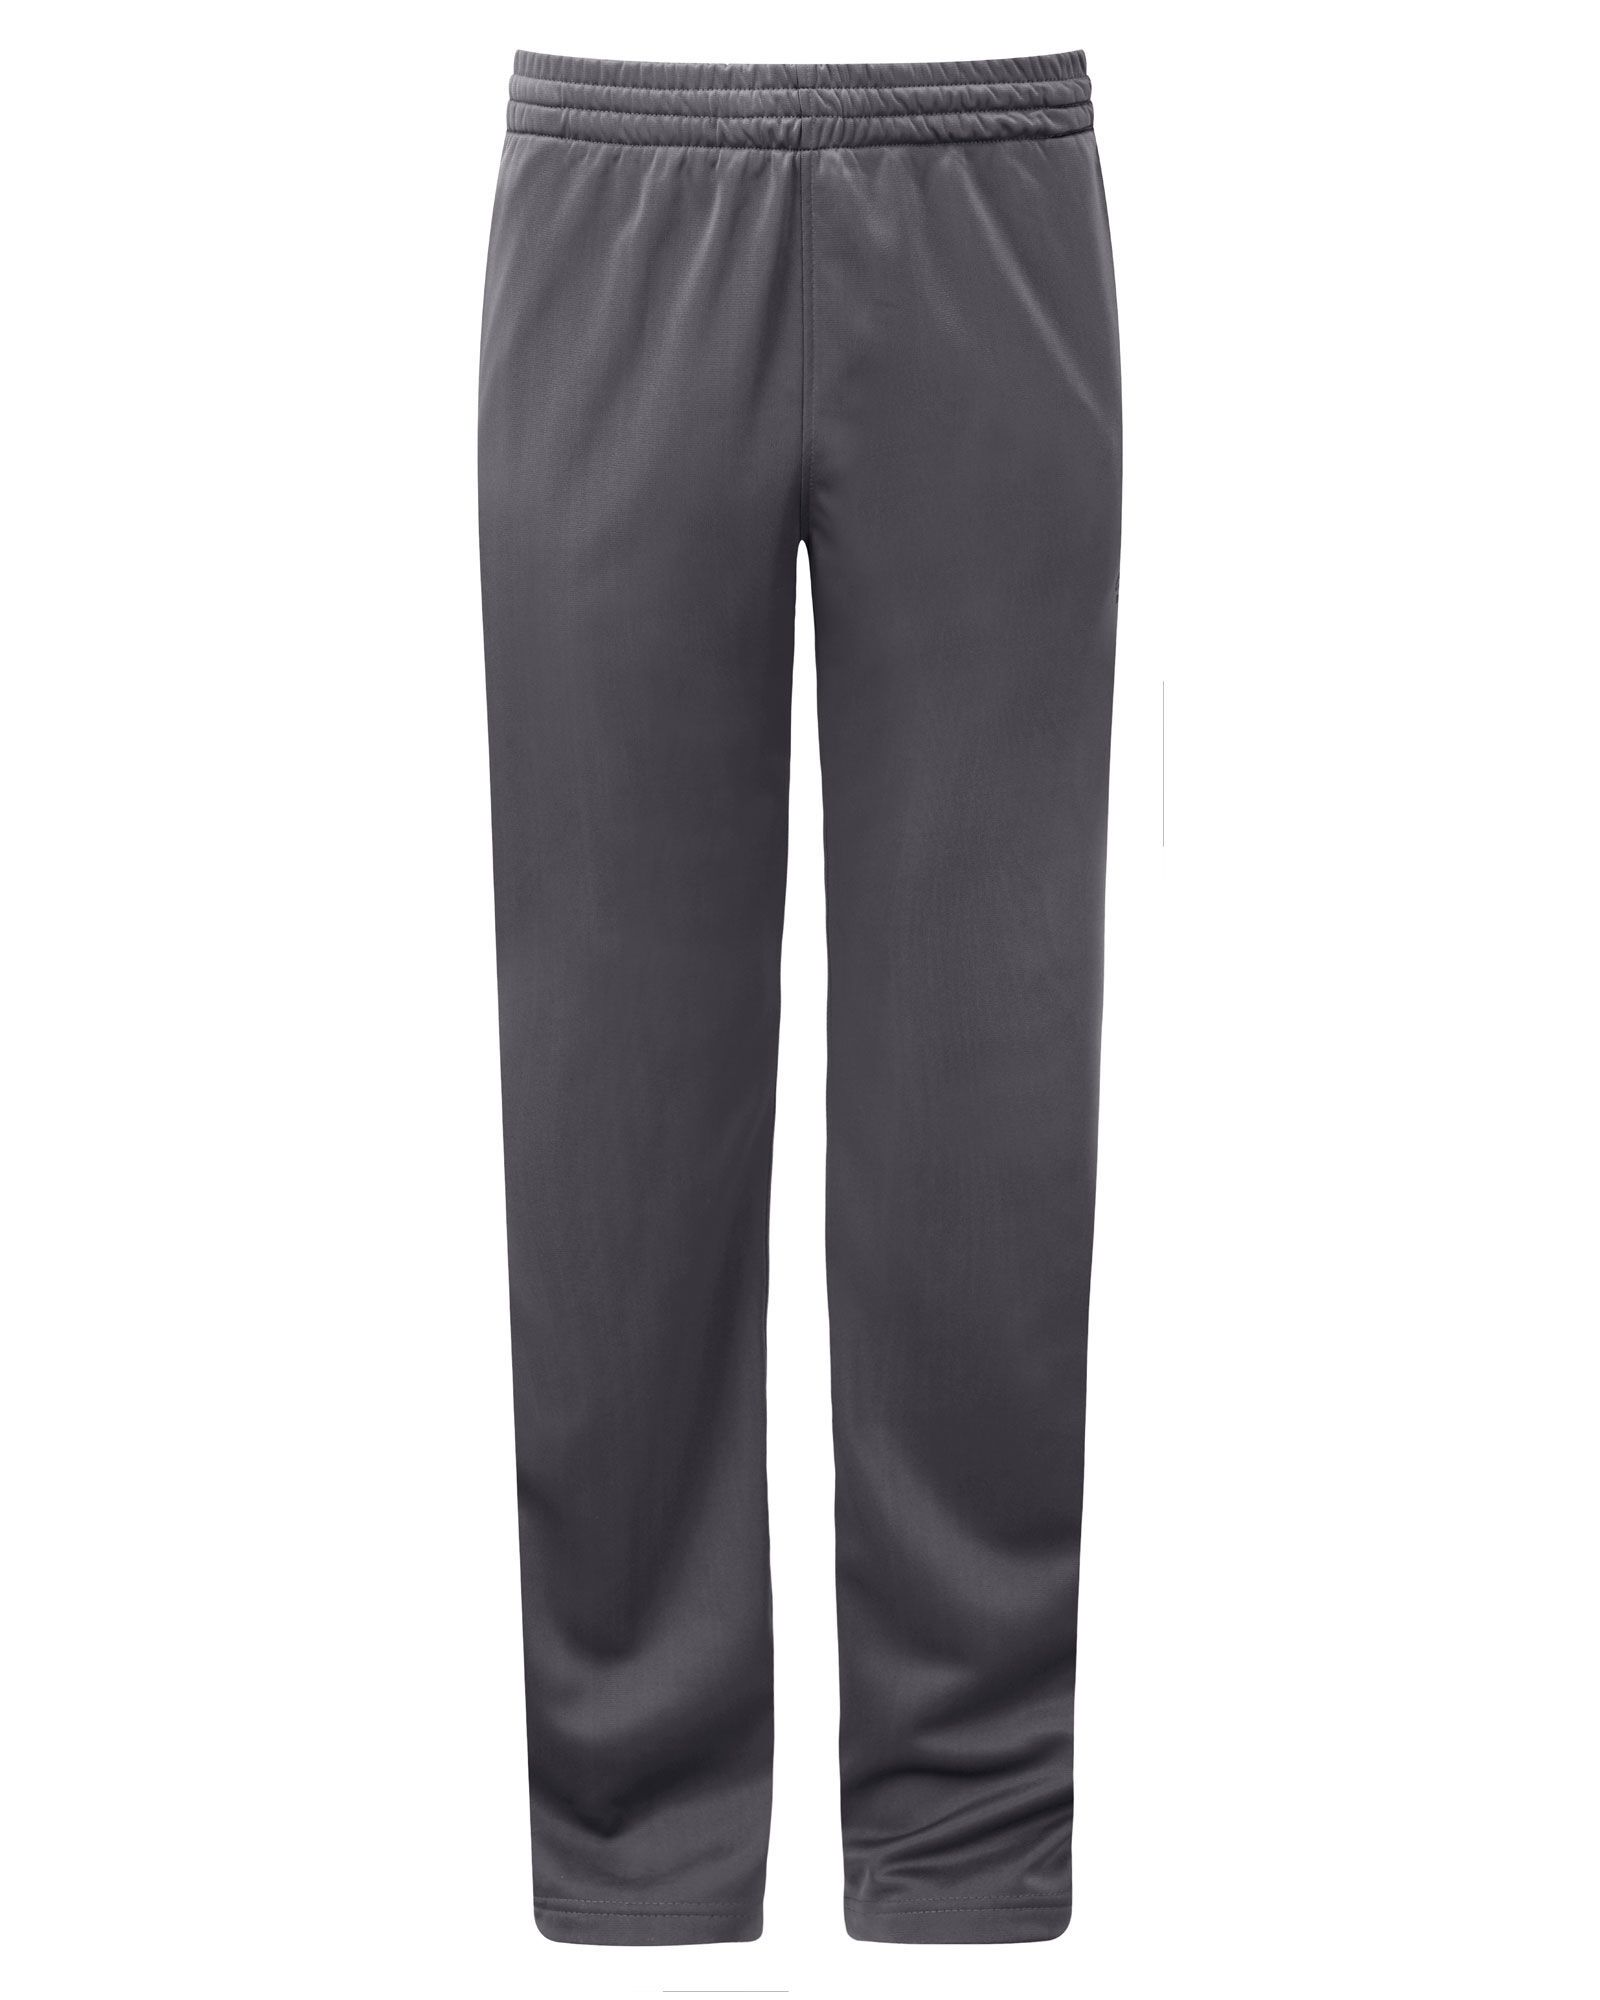 cotton traders track pants